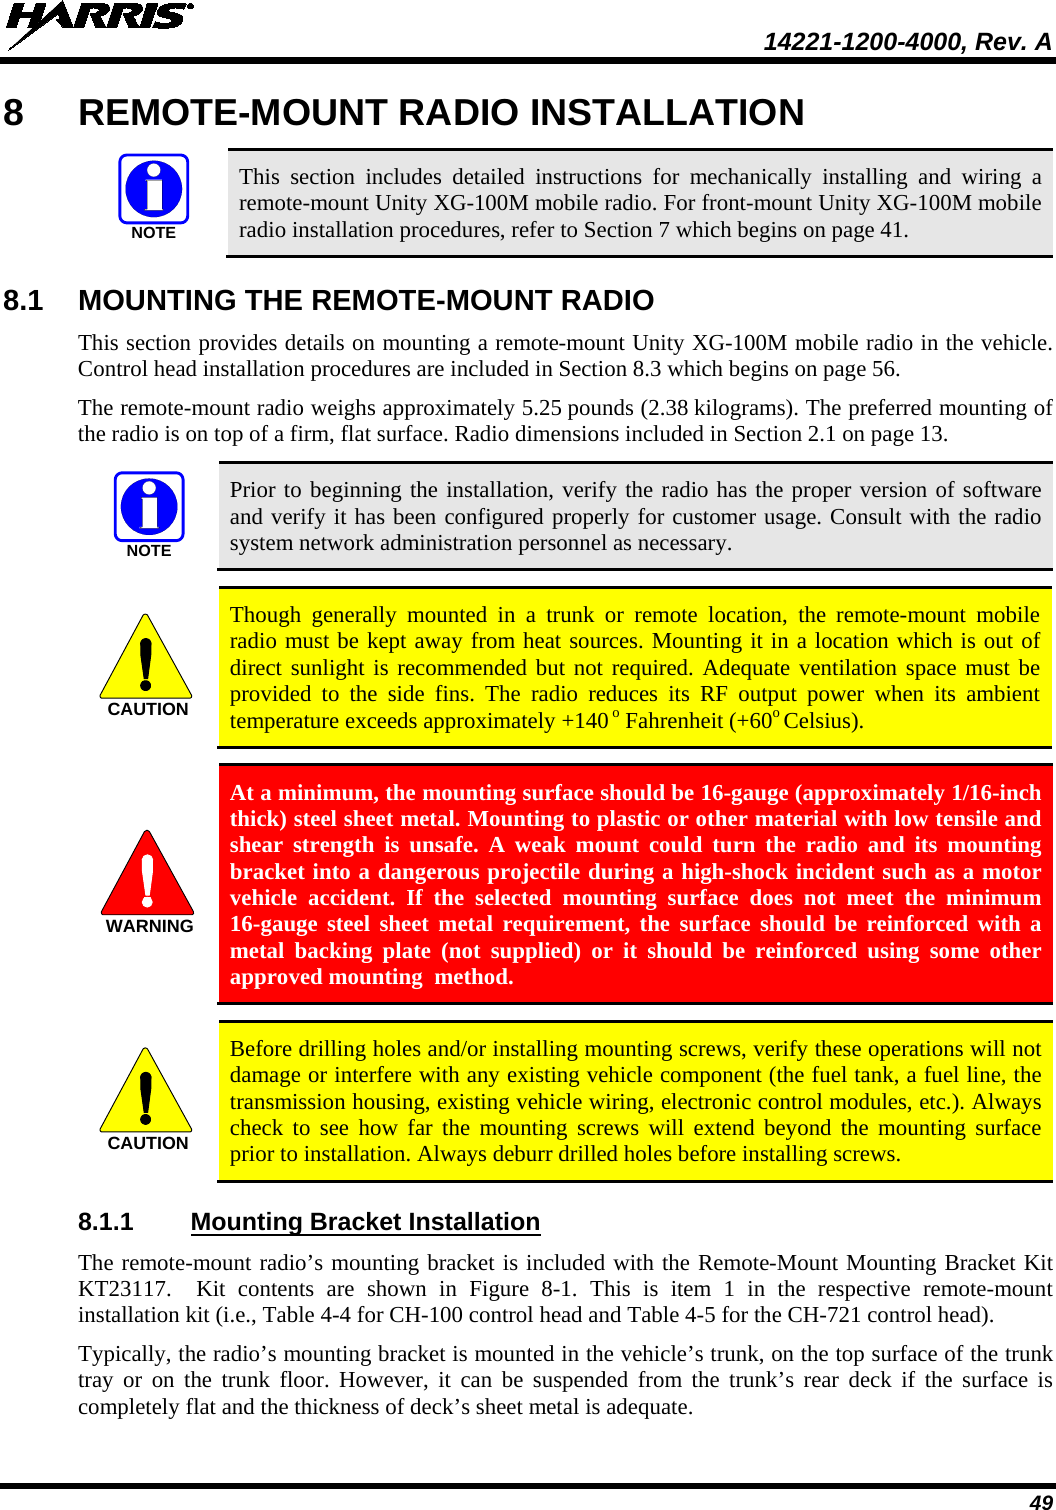  14221-1200-4000, Rev. A  49 8  REMOTE-MOUNT RADIO INSTALLATION   This section includes detailed instructions for mechanically installing and wiring a remote-mount Unity XG-100M mobile radio. For front-mount Unity XG-100M mobile radio installation procedures, refer to Section 7 which begins on page 41. 8.1 MOUNTING THE REMOTE-MOUNT RADIO This section provides details on mounting a remote-mount Unity XG-100M mobile radio in the vehicle. Control head installation procedures are included in Section 8.3 which begins on page 56. The remote-mount radio weighs approximately 5.25 pounds (2.38 kilograms). The preferred mounting of the radio is on top of a firm, flat surface. Radio dimensions included in Section 2.1 on page 13.   Prior to beginning the installation, verify the radio has the proper version of software and verify it has been configured properly for customer usage. Consult with the radio system network administration personnel as necessary.   Though generally mounted in a trunk or remote location, the remote-mount  mobile radio must be kept away from heat sources. Mounting it in a location which is out of direct sunlight is recommended but not required. Adequate ventilation space must be provided to the side fins. The radio reduces its RF output power when its ambient temperature exceeds approximately +140 o Fahrenheit (+60o Celsius).   At a minimum, the mounting surface should be 16-gauge (approximately 1/16-inch thick) steel sheet metal. Mounting to plastic or other material with low tensile and shear strength is  unsafe. A weak mount could turn the radio and its mounting bracket into a dangerous projectile during a high-shock incident such as a motor vehicle accident. If the selected mounting surface does not meet the minimum 16-gauge steel sheet metal requirement, the surface should be reinforced with a metal backing plate (not supplied) or it should be reinforced using some other approved mounting  method.   Before drilling holes and/or installing mounting screws, verify these operations will not damage or interfere with any existing vehicle component (the fuel tank, a fuel line, the transmission housing, existing vehicle wiring, electronic control modules, etc.). Always check to see how far the mounting screws will extend beyond the mounting surface prior to installation. Always deburr drilled holes before installing screws. 8.1.1 Mounting Bracket Installation The remote-mount radio’s mounting bracket is included with the Remote-Mount Mounting Bracket Kit KT23117.  Kit contents are shown in Figure  8-1.  This is item 1  in the respective remote-mount installation kit (i.e., Table 4-4 for CH-100 control head and Table 4-5 for the CH-721 control head). Typically, the radio’s mounting bracket is mounted in the vehicle’s trunk, on the top surface of the trunk tray or on  the trunk floor. However, it can be suspended from the trunk’s rear deck if the surface is completely flat and the thickness of deck’s sheet metal is adequate. NOTENOTECAUTIONWARNINGCAUTION